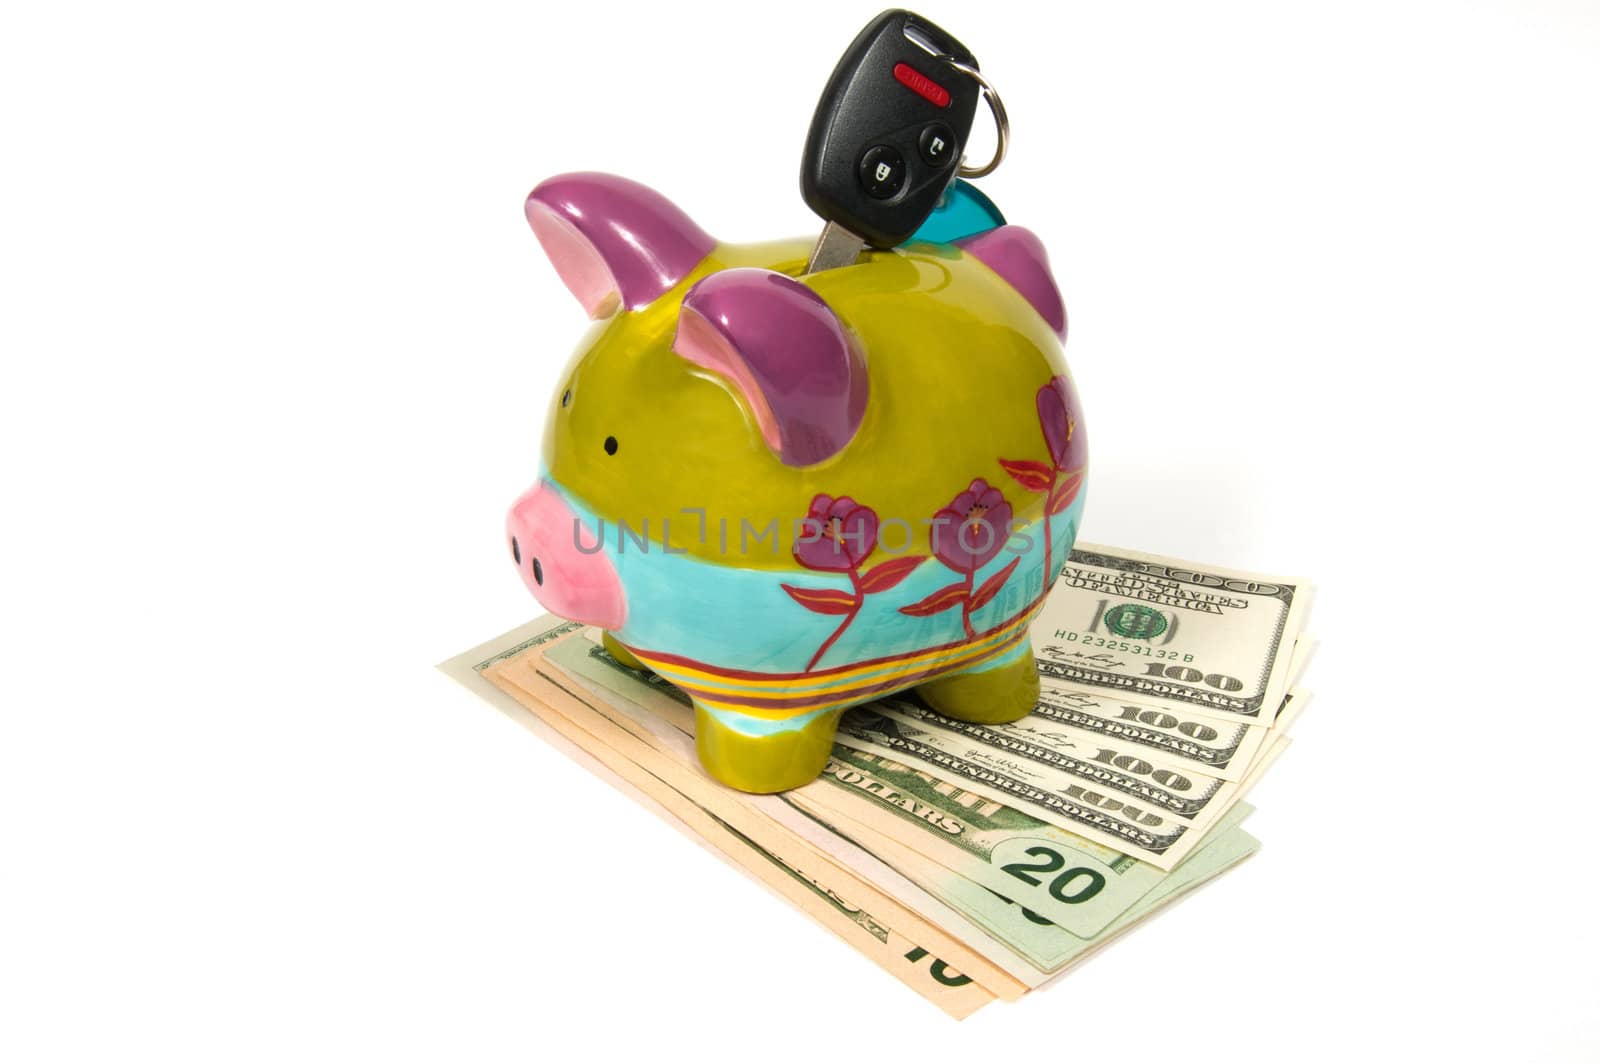 Colored piggy bank with key for car and money.